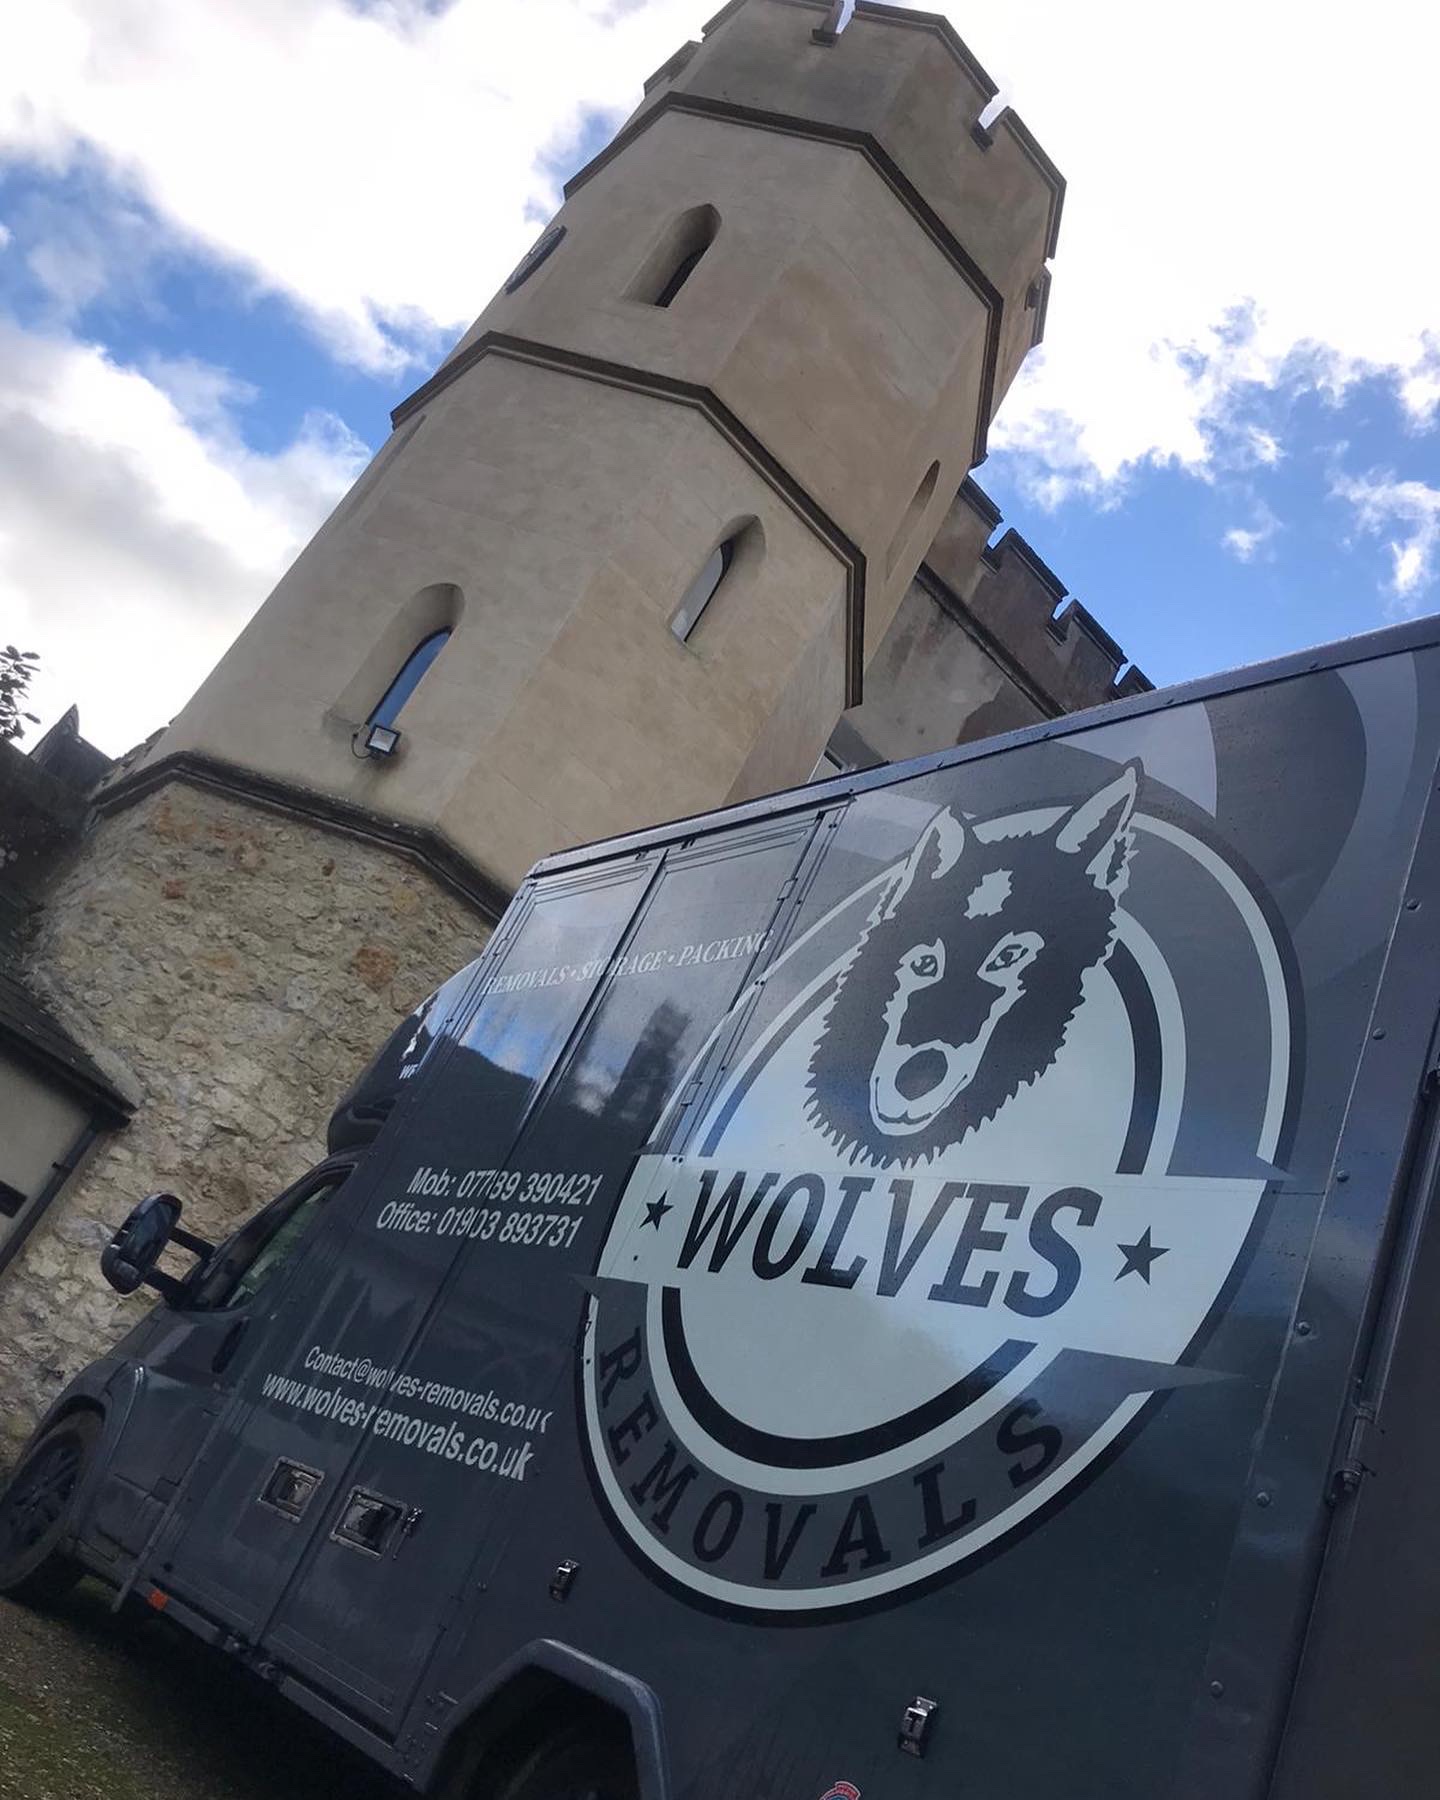 Wolves removals, full packing and storage service across West Sussex 